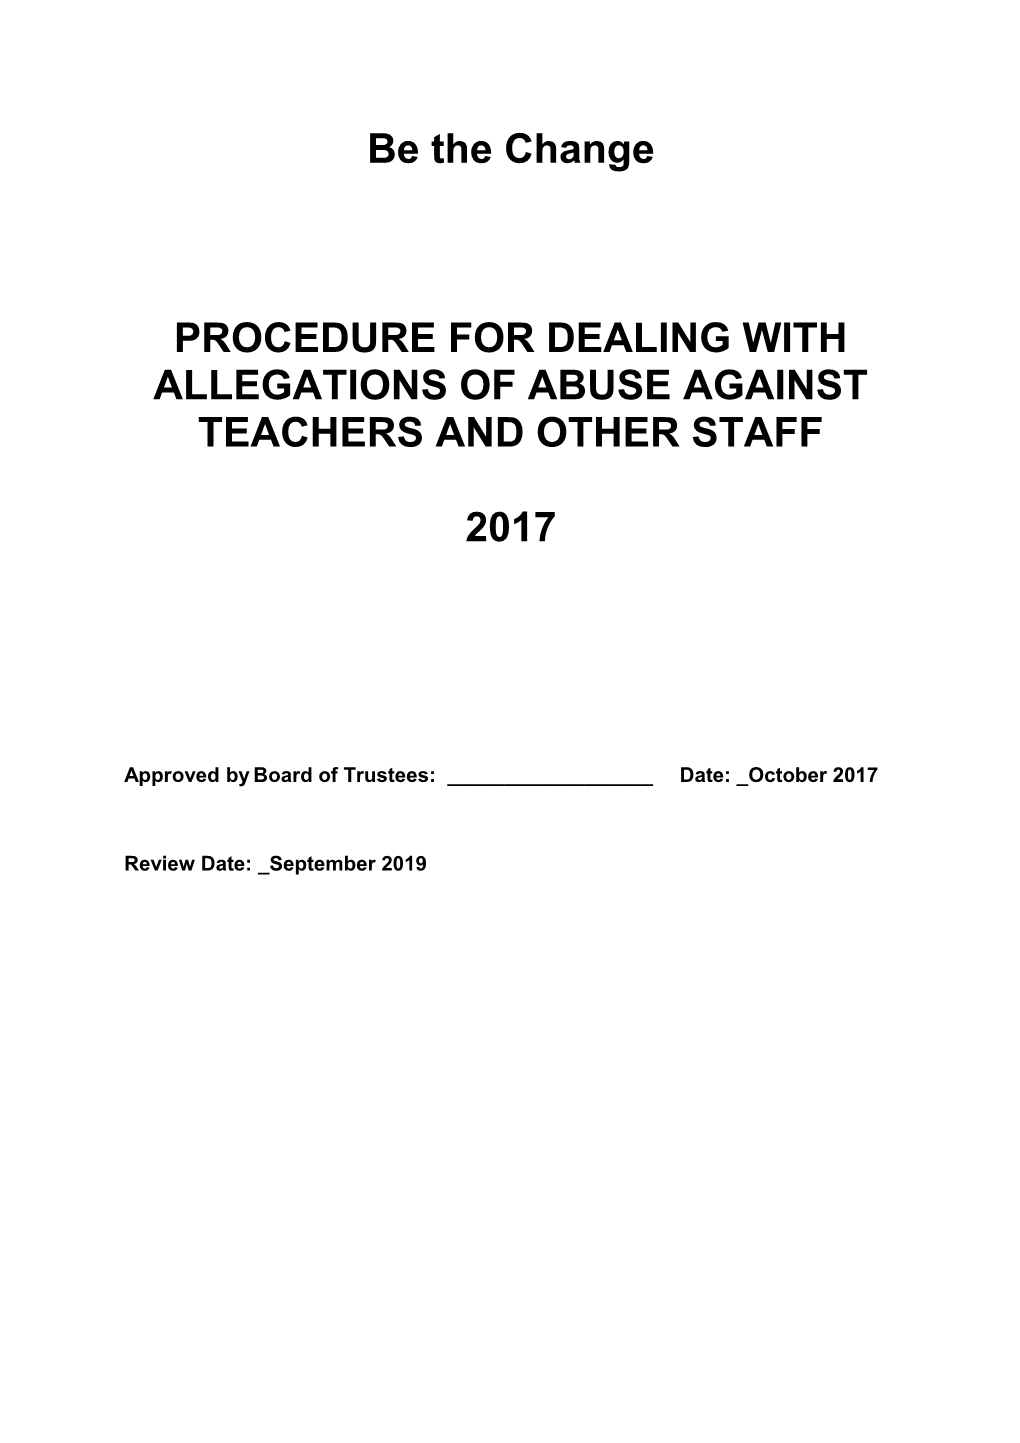 Procedure for Dealing with Allegations of Abuse Against Teachers and Other Staff